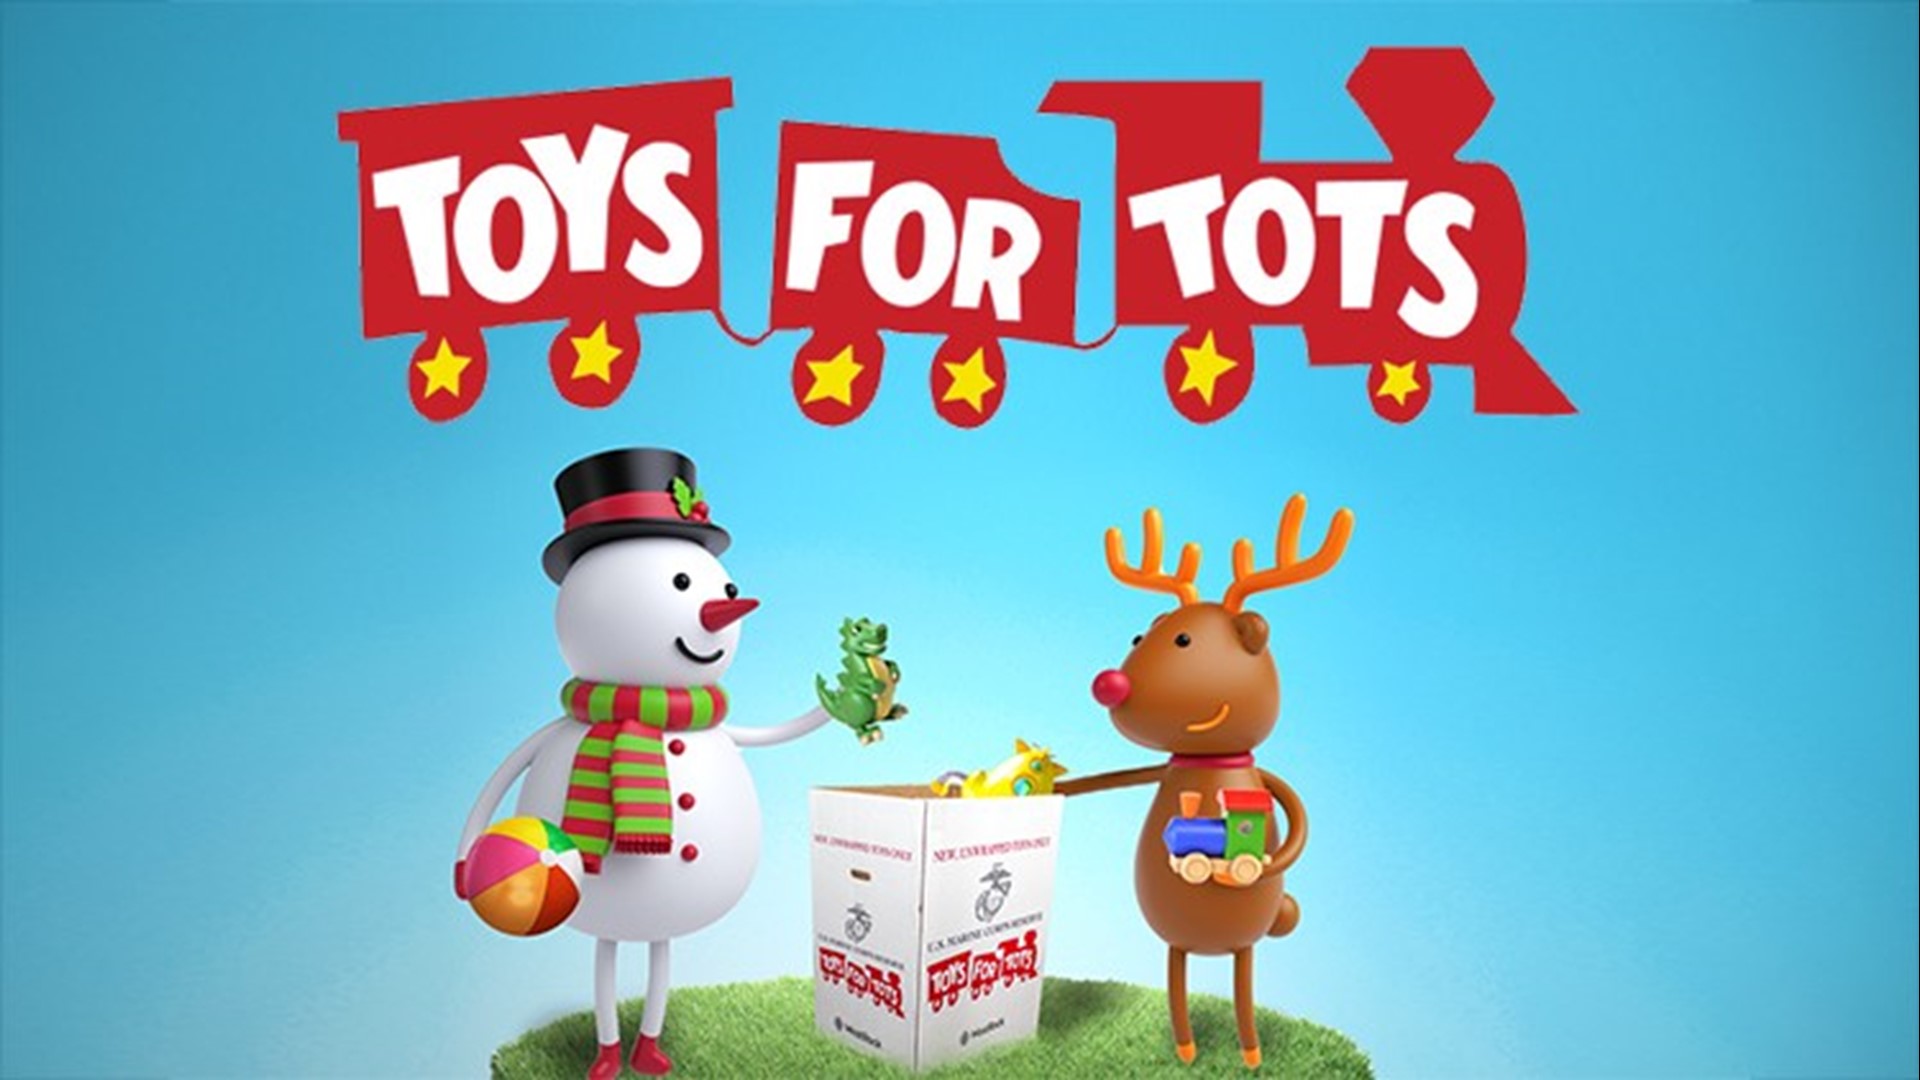 A record number of families are expected to register for Toys for Tots this year, and the program needs your help to bring in donations.